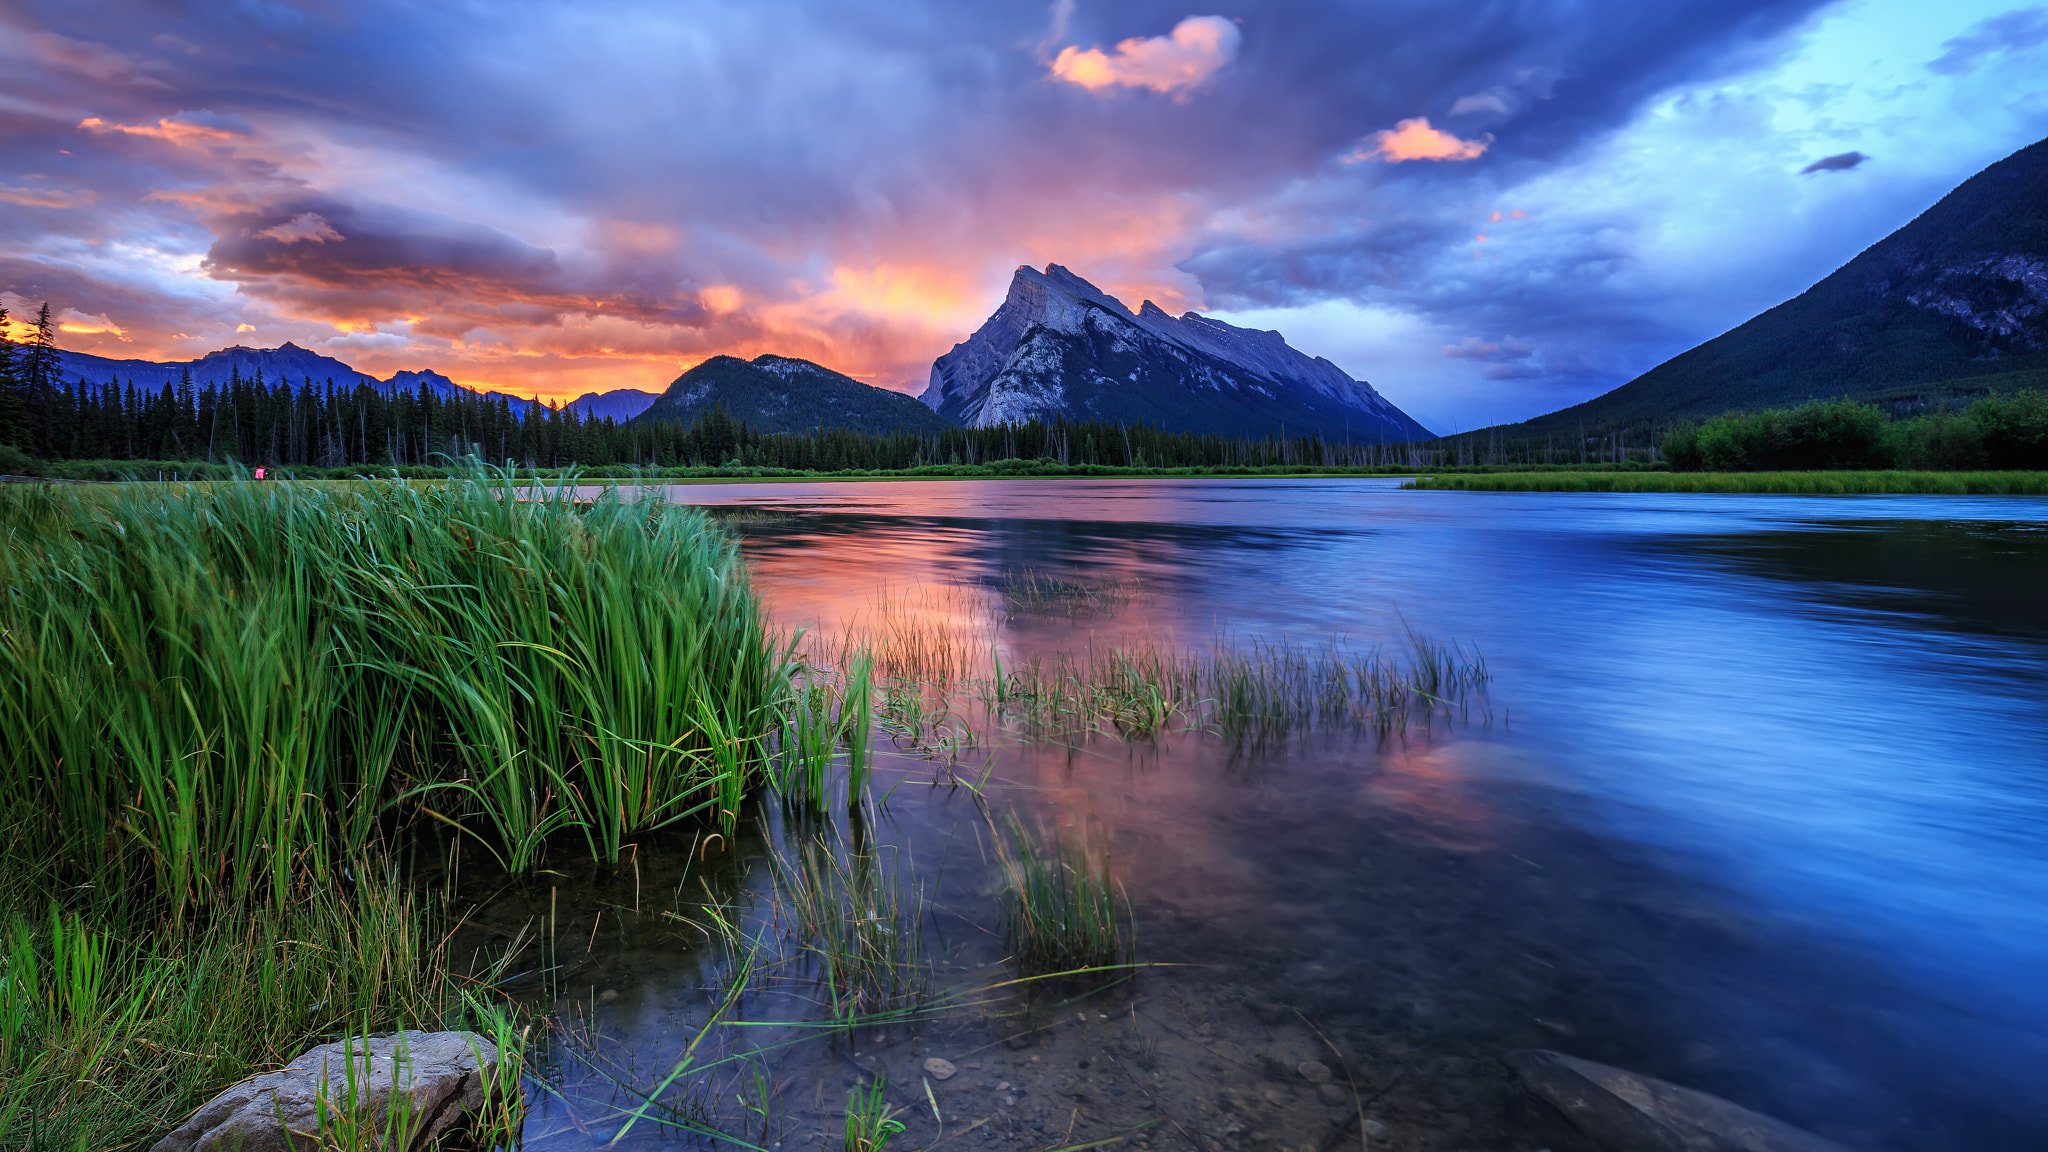 Wallpapers Sunrise over mount Rundle Banff Canada on the desktop